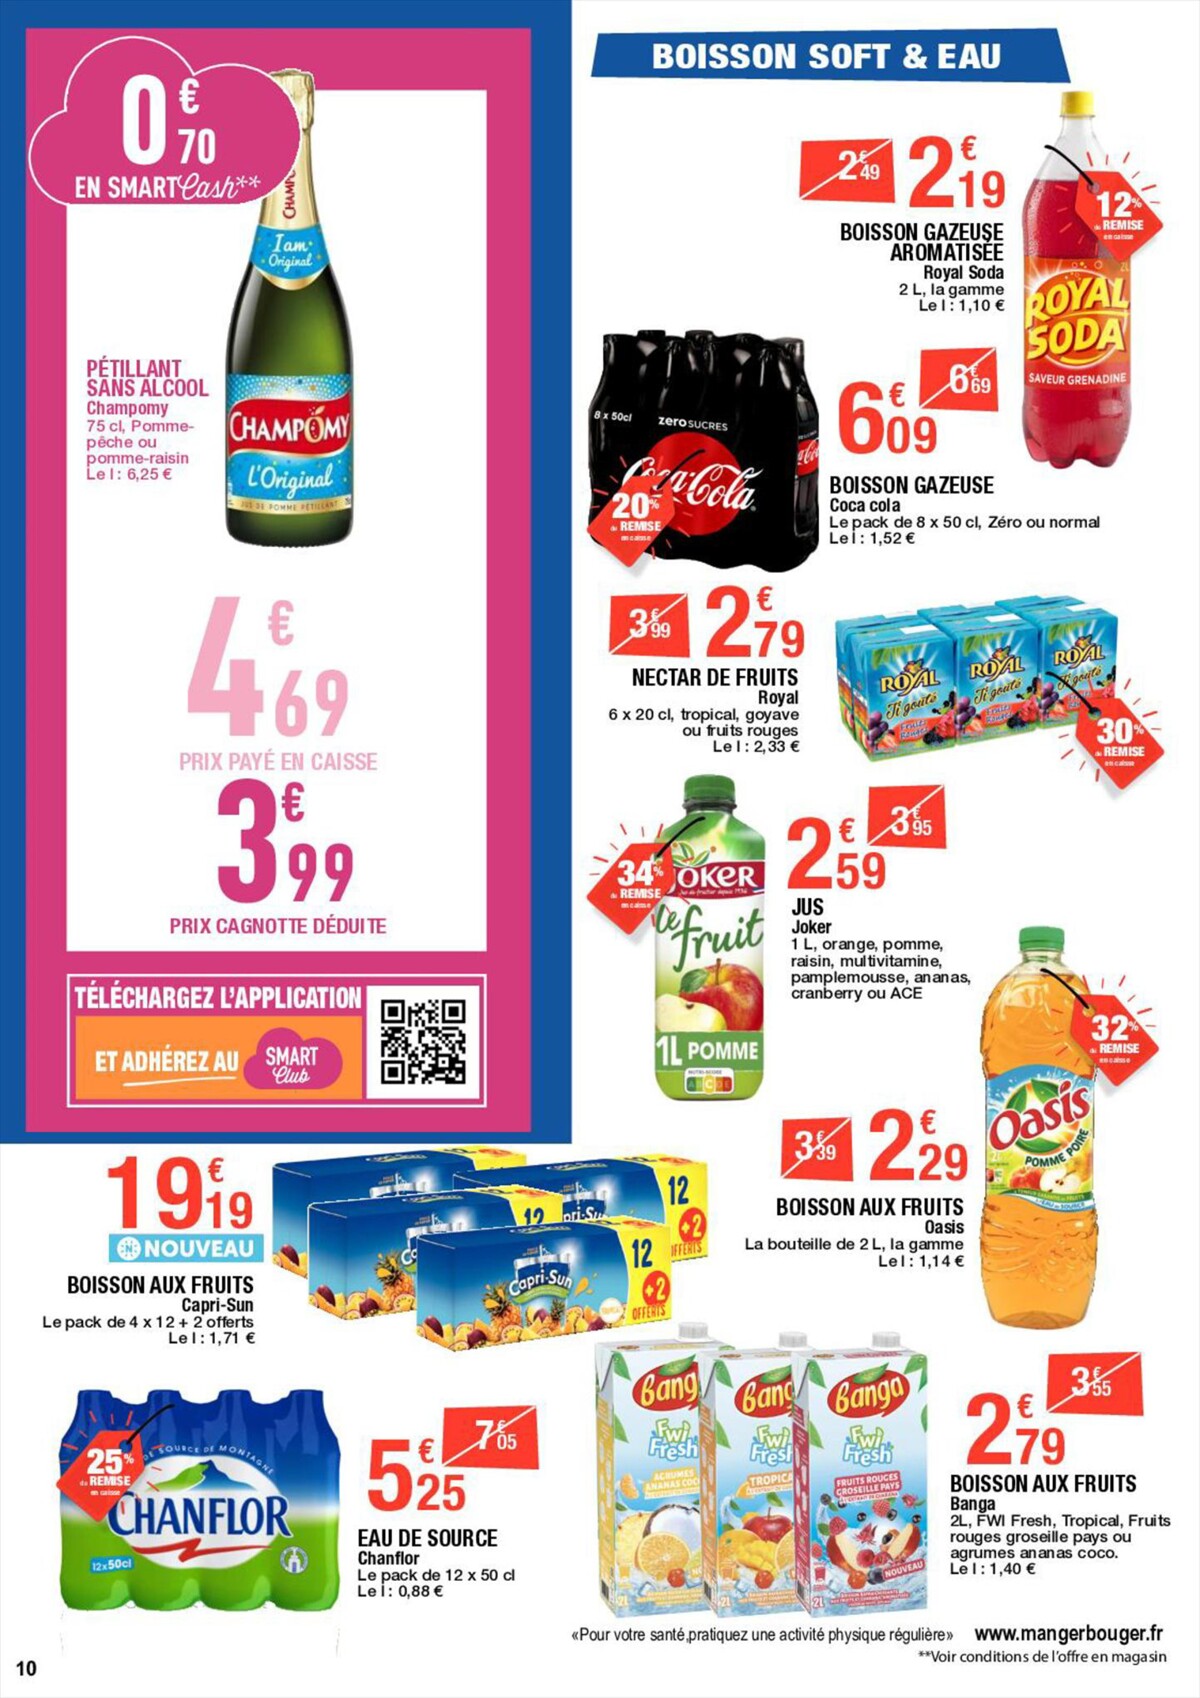 Catalogue Carrefour Special MDD, page 00010